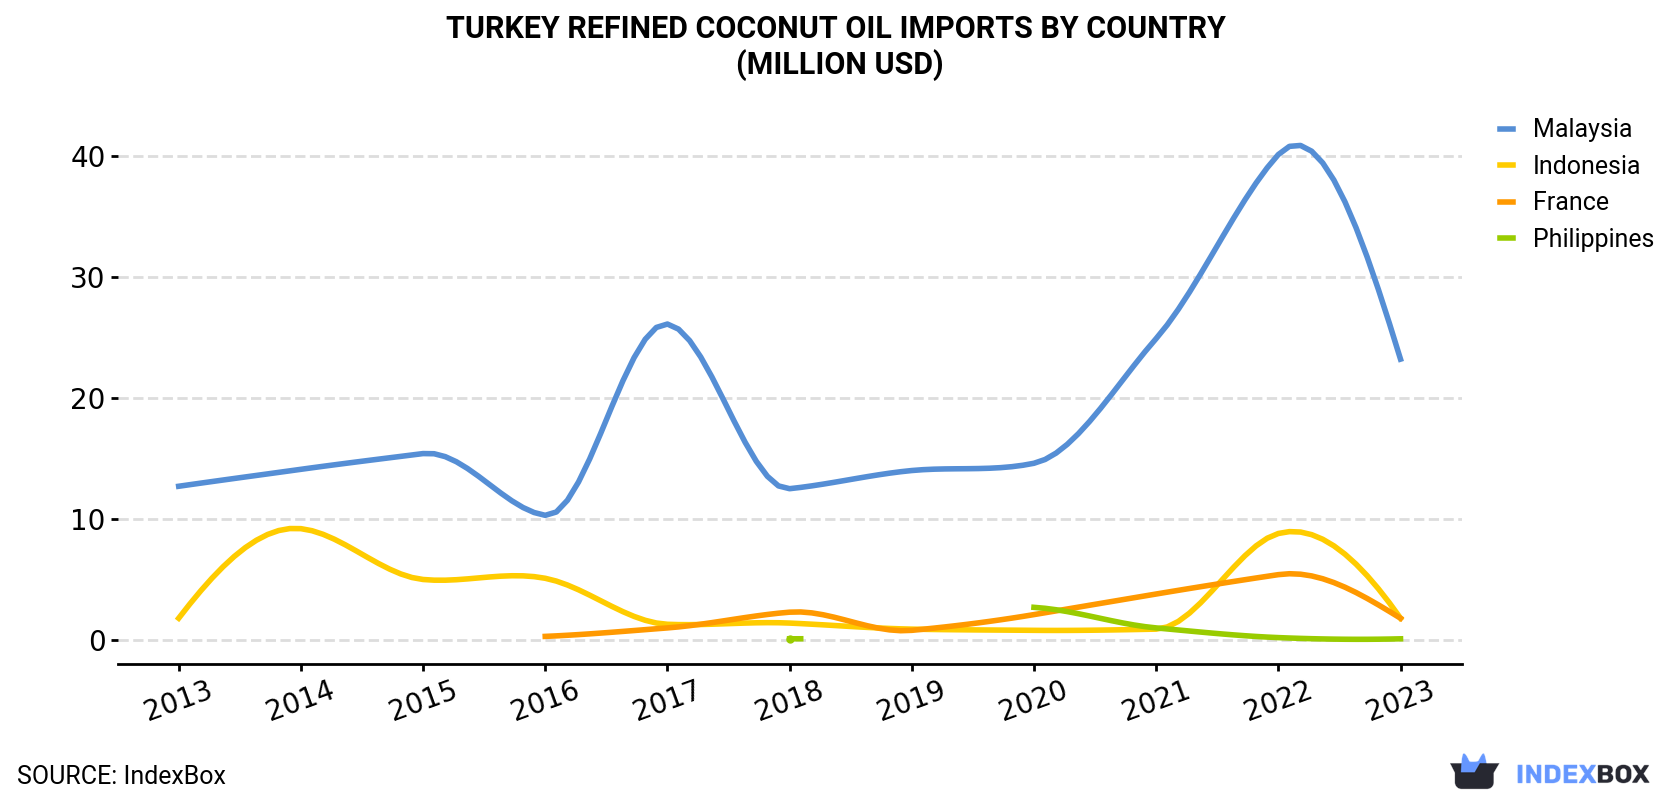 Turkey Refined Coconut Oil Imports By Country (Million USD)